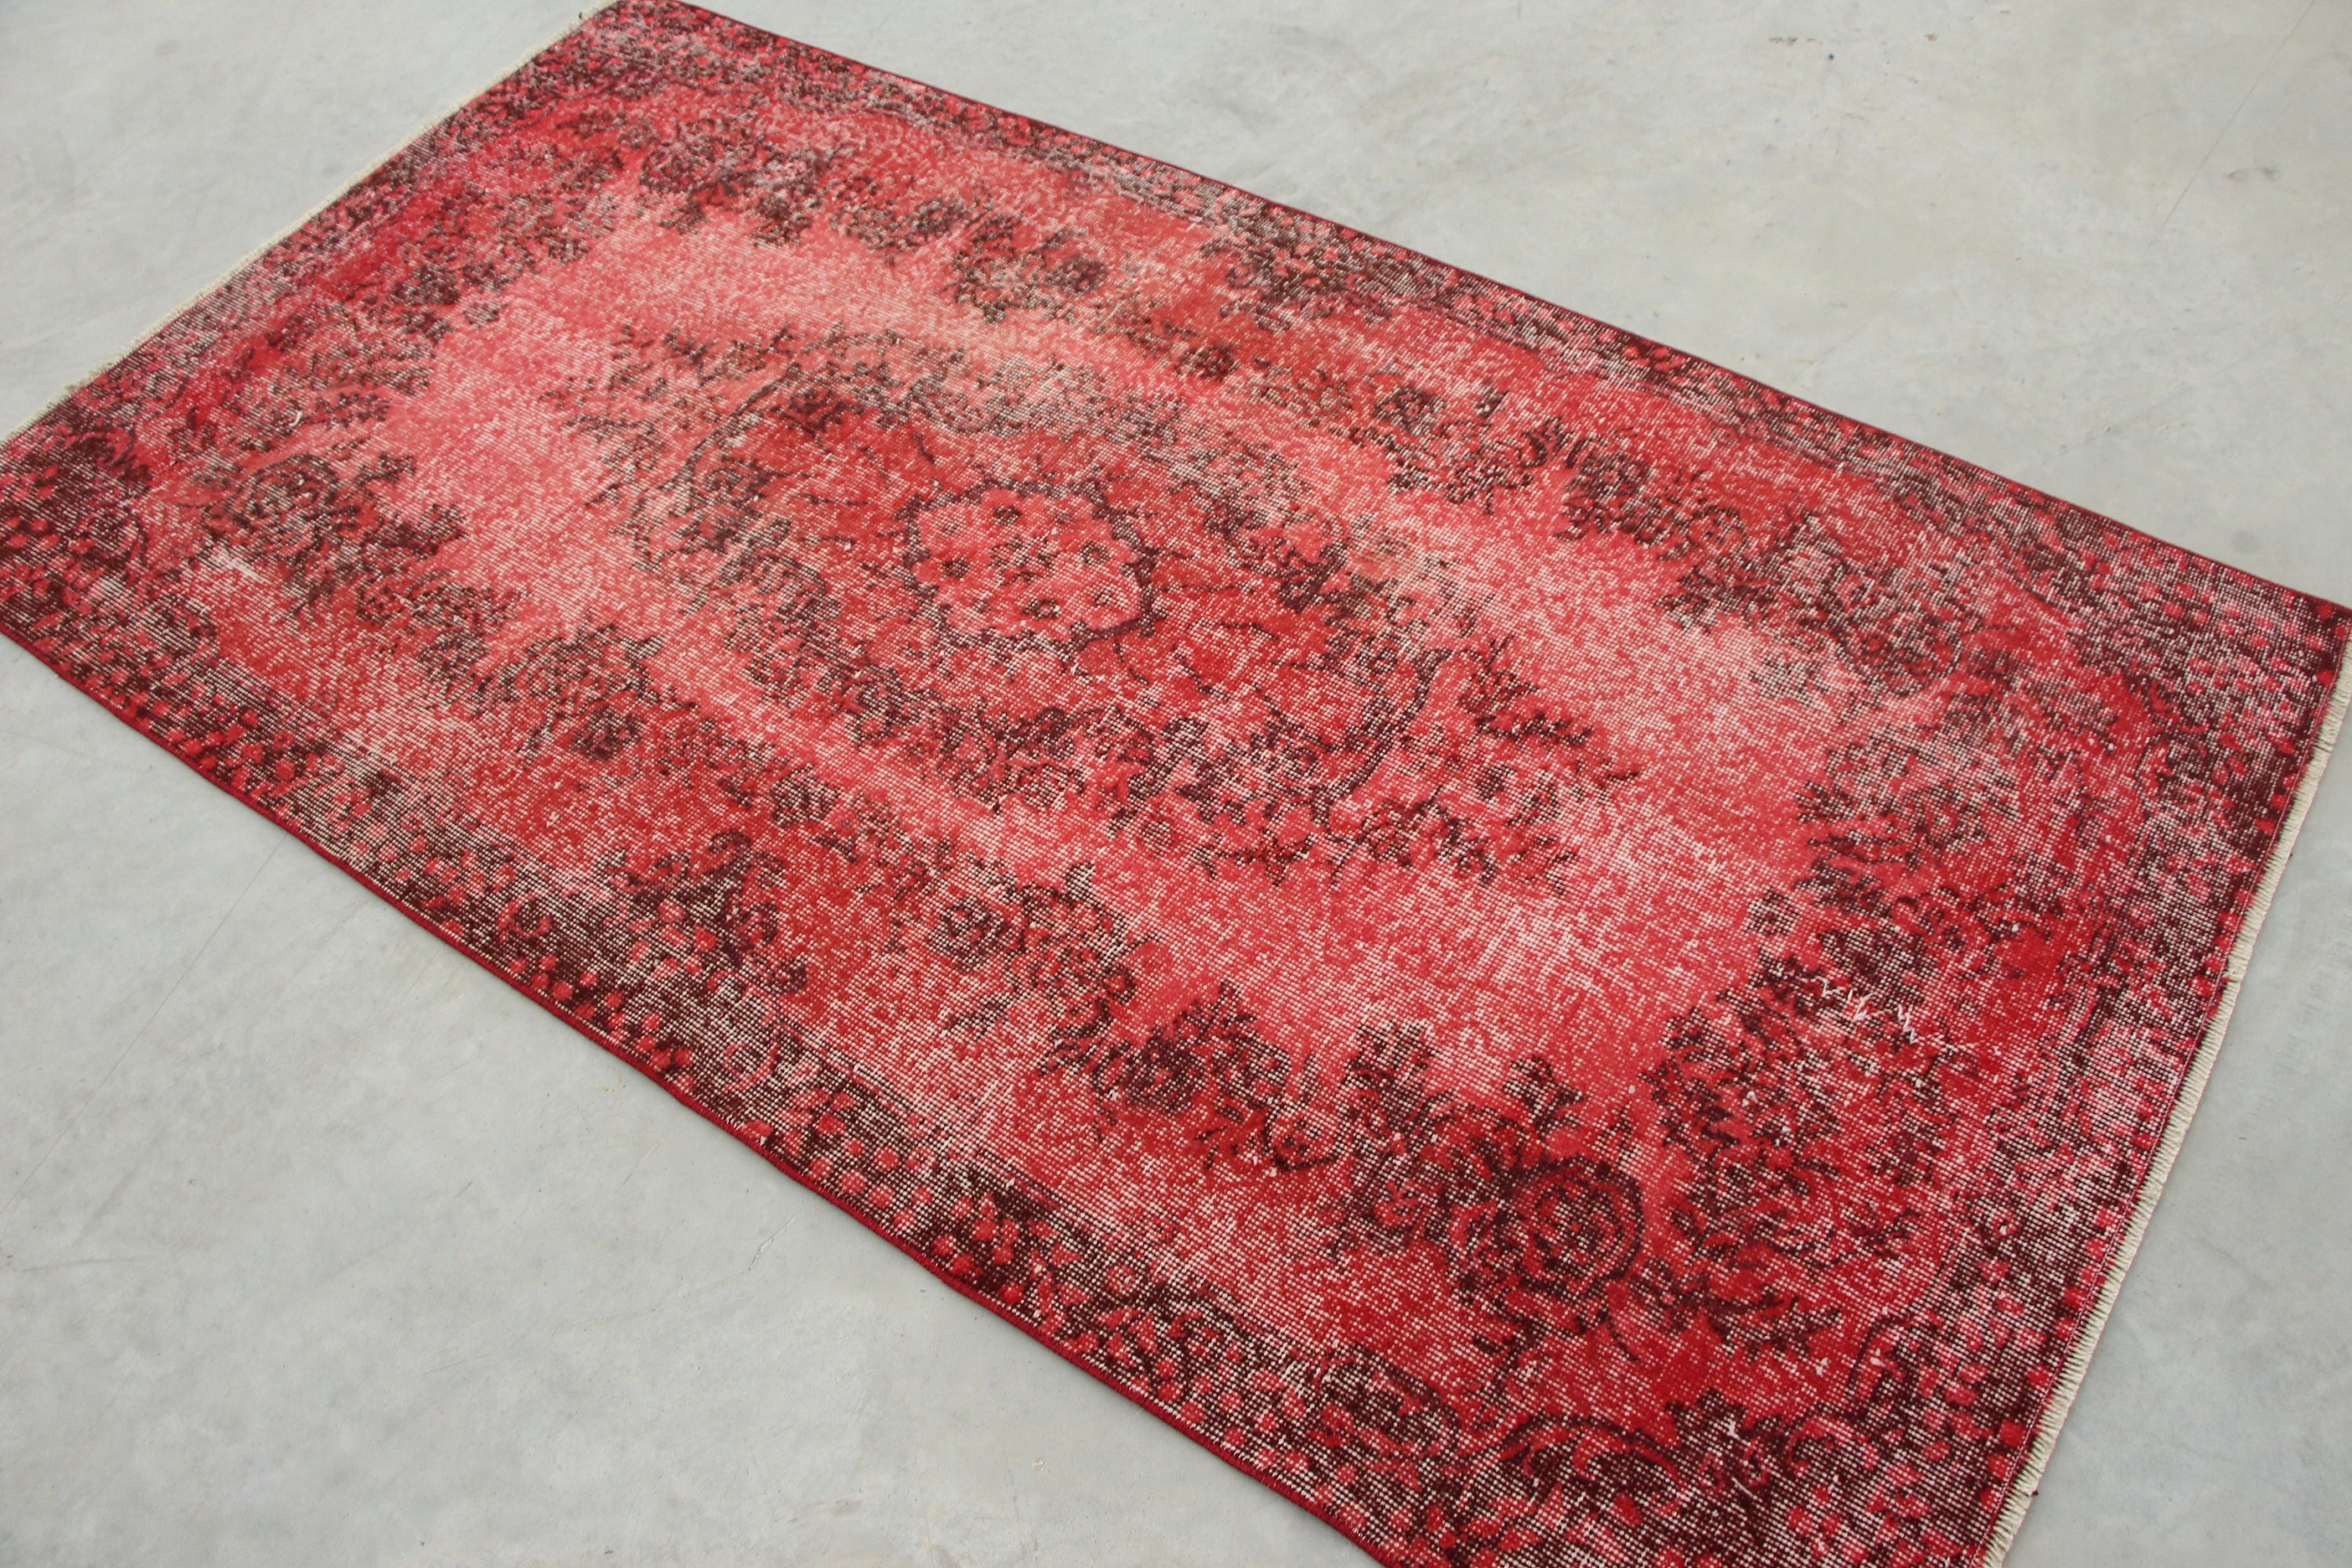 Rugs for Bedroom, 3.6x6.6 ft Accent Rug, Oushak Rug, Red Kitchen Rugs, Home Decor Rug, Nursery Rug, Abstract Rug, Turkish Rugs, Vintage Rug